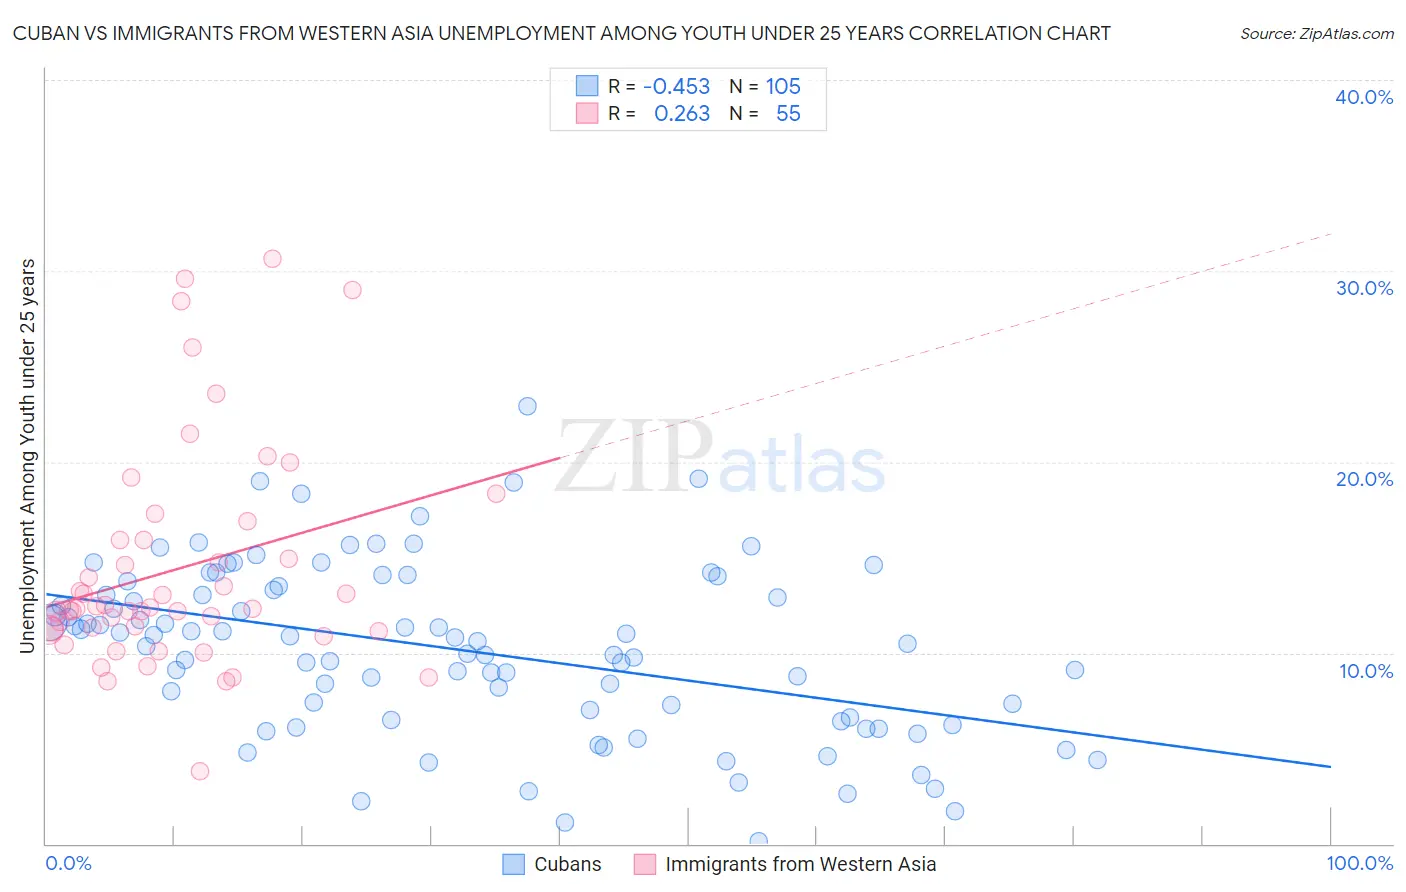 Cuban vs Immigrants from Western Asia Unemployment Among Youth under 25 years